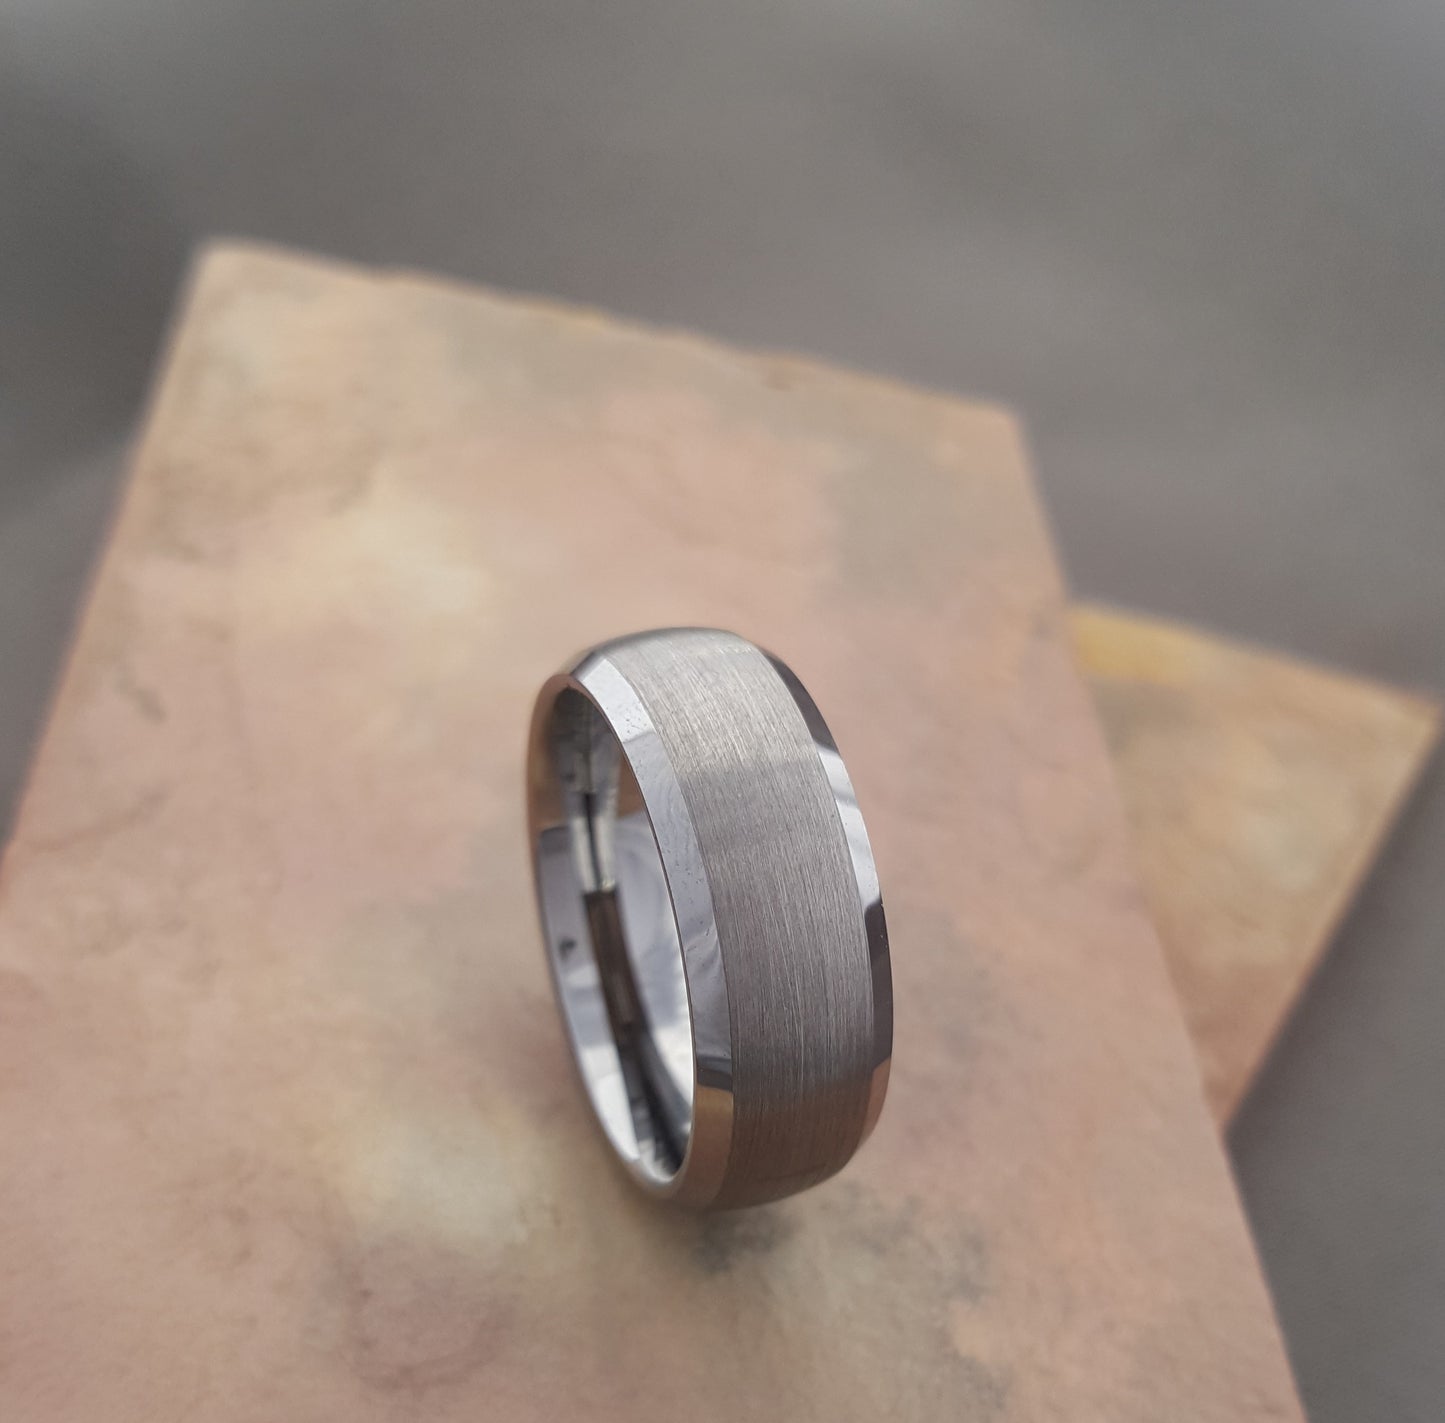 8mm Wide Brushed Tungsten Ring with Polished Beveled Edges